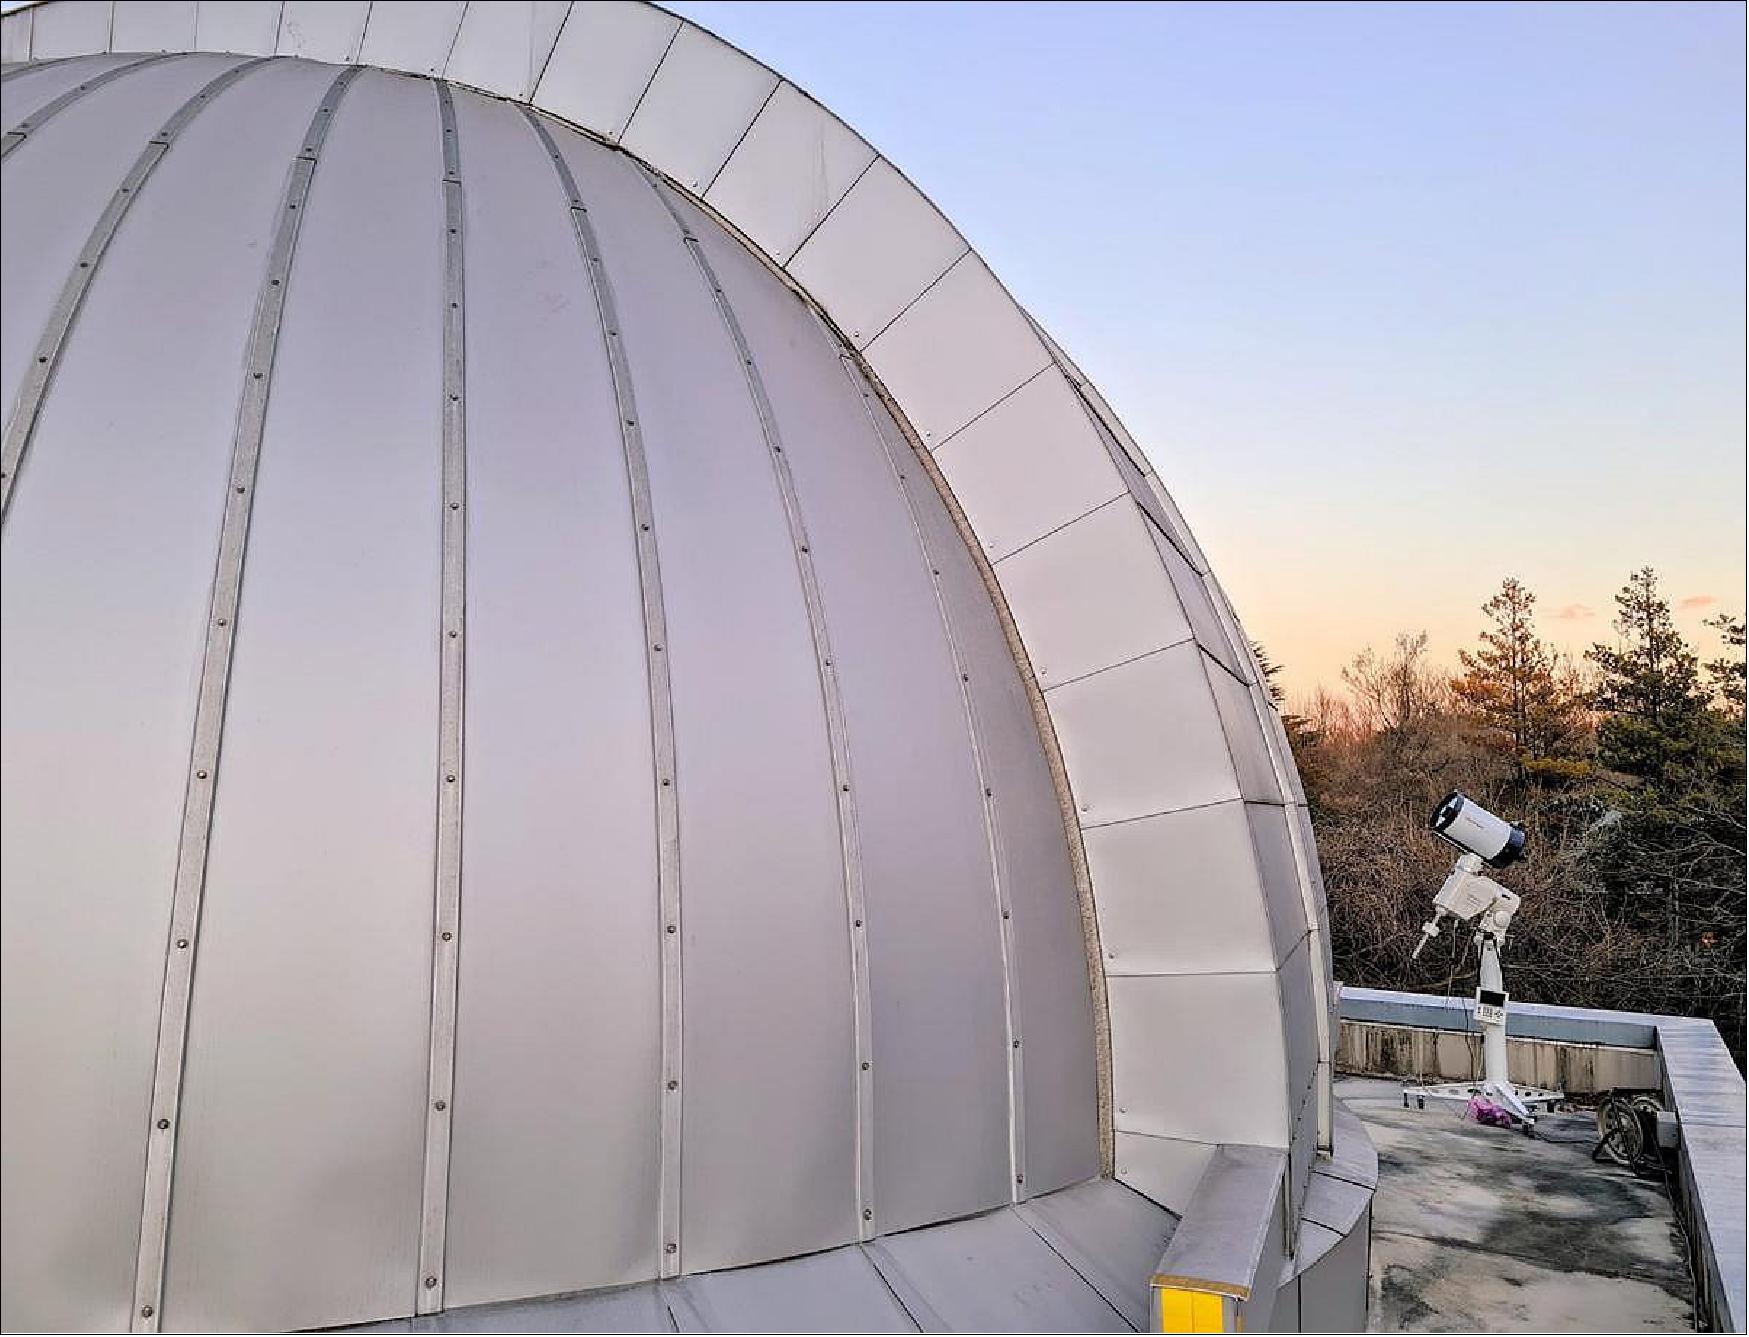 Figure 19: NICT's optical ground station with its 20 cm telescope (right) and the dome for its one-meter telescope (image credit: NICT)